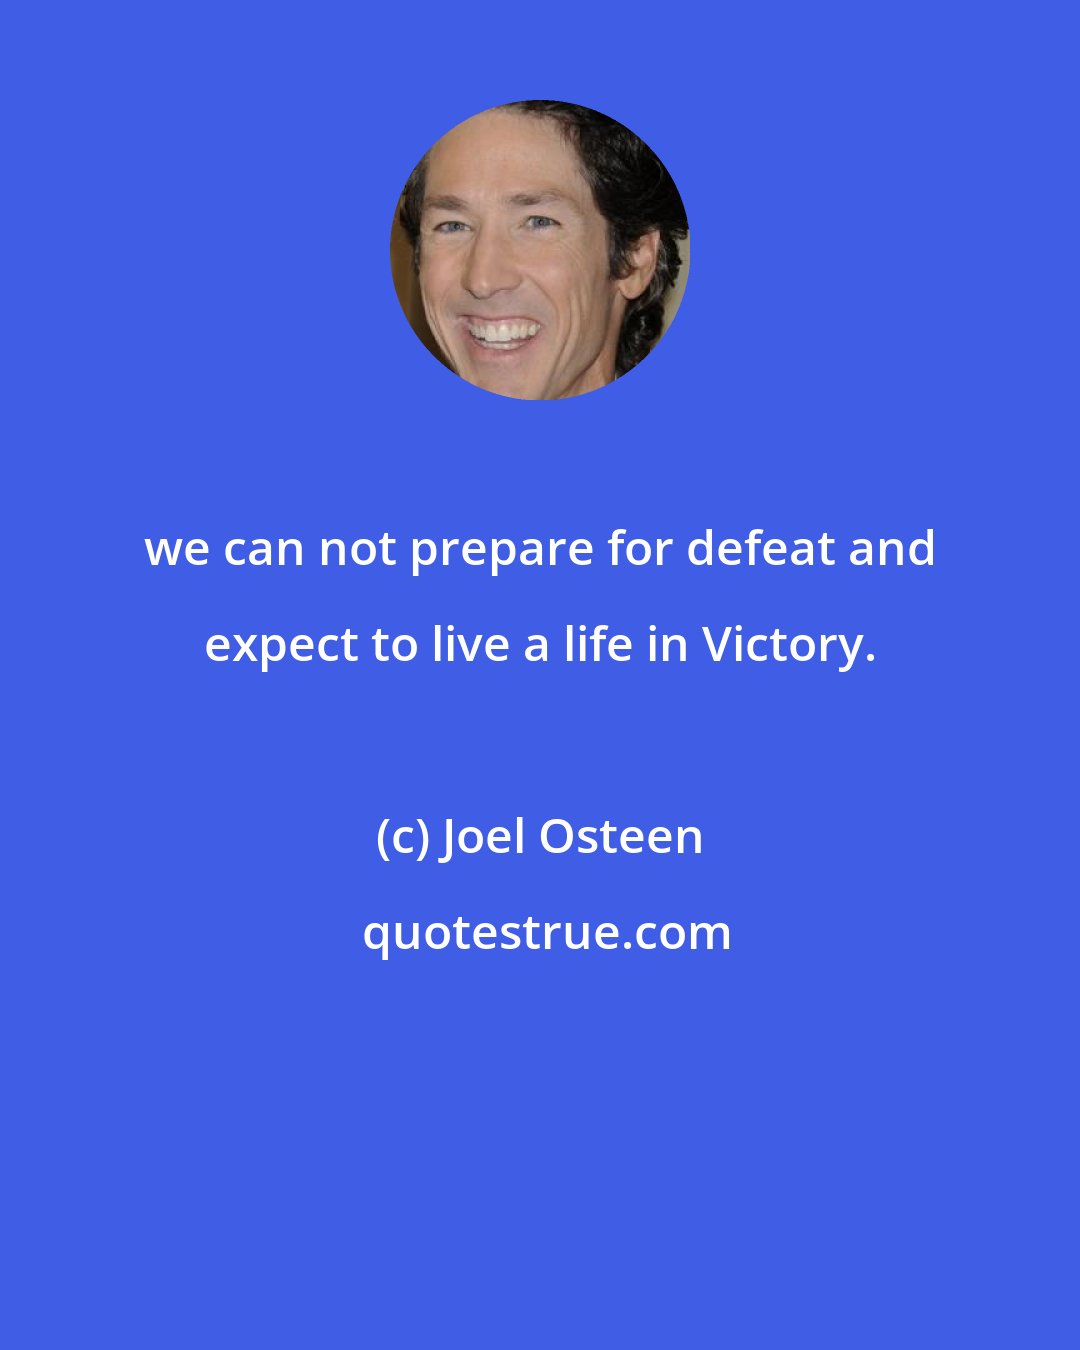 Joel Osteen: we can not prepare for defeat and expect to live a life in Victory.